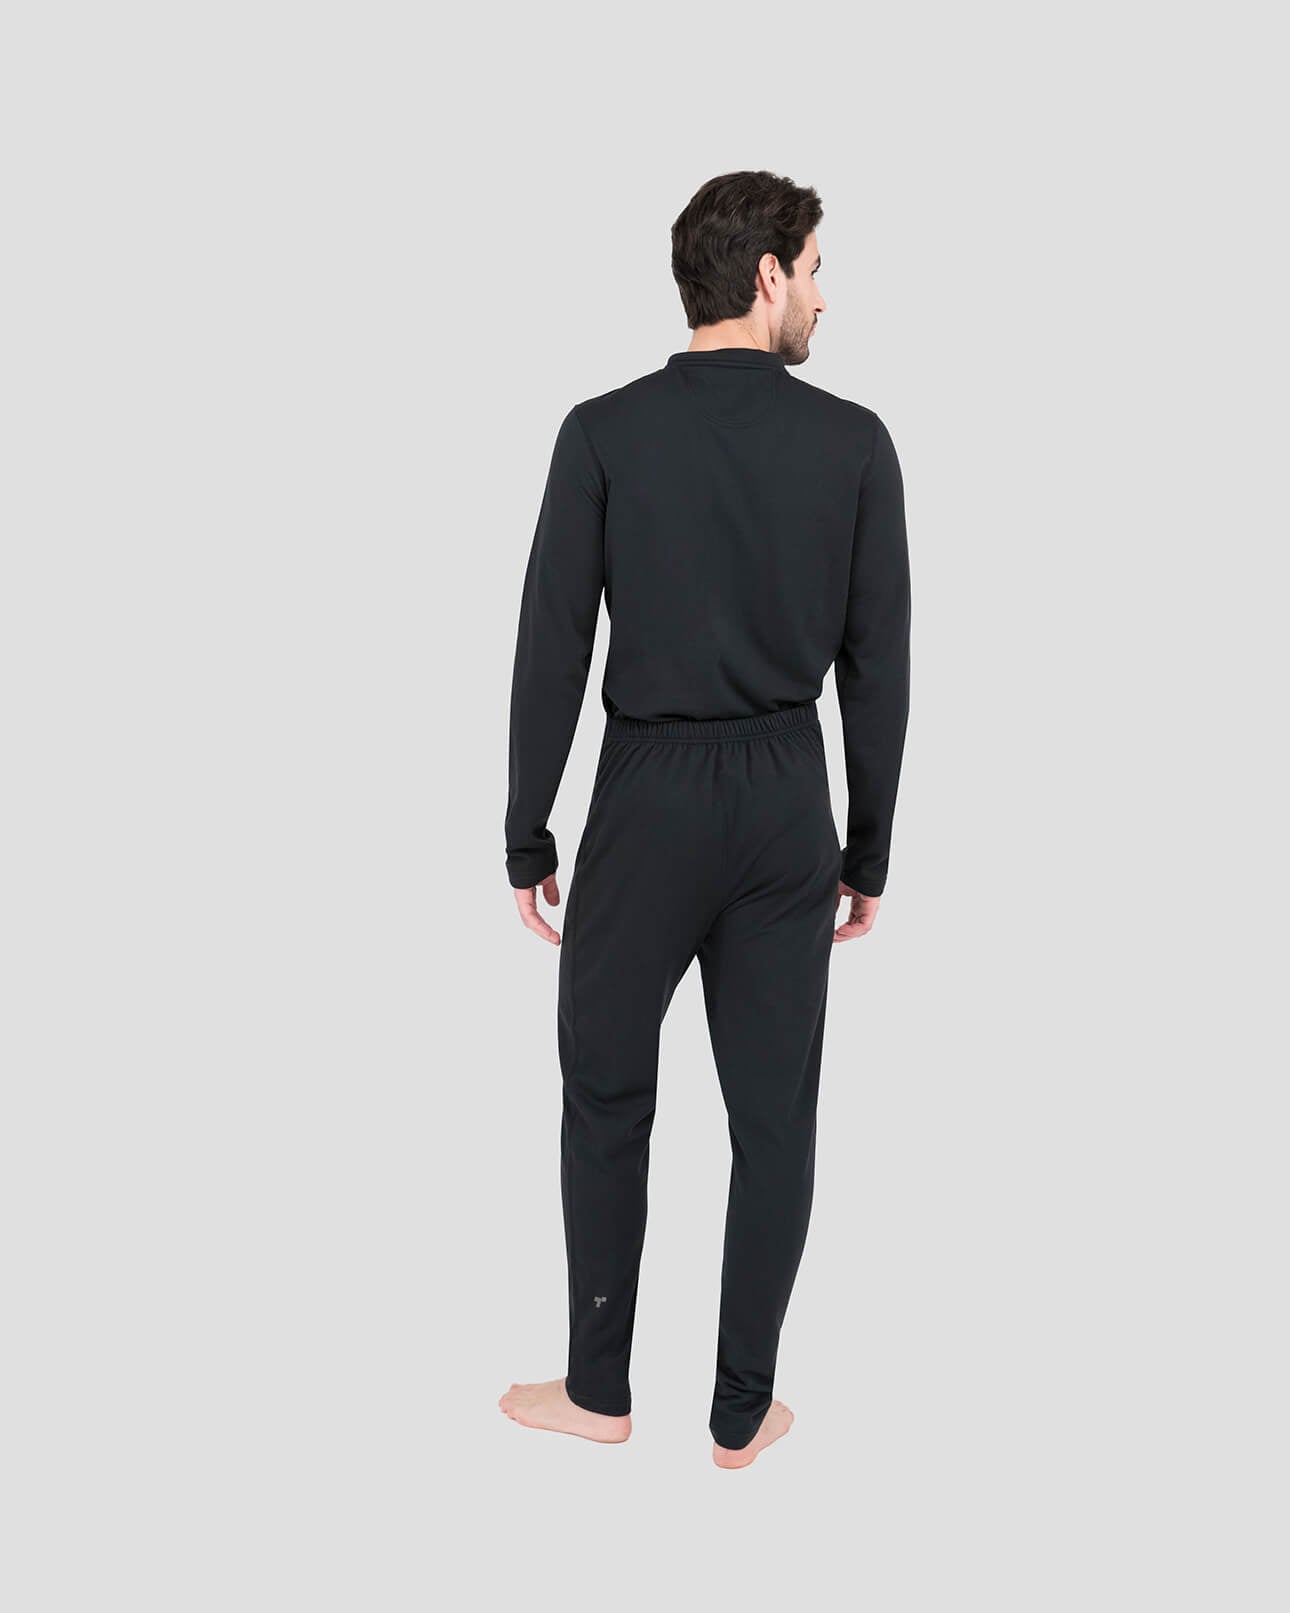 Men's Military Heritage Expedition Weight Fleece Union Suit | Color: Black